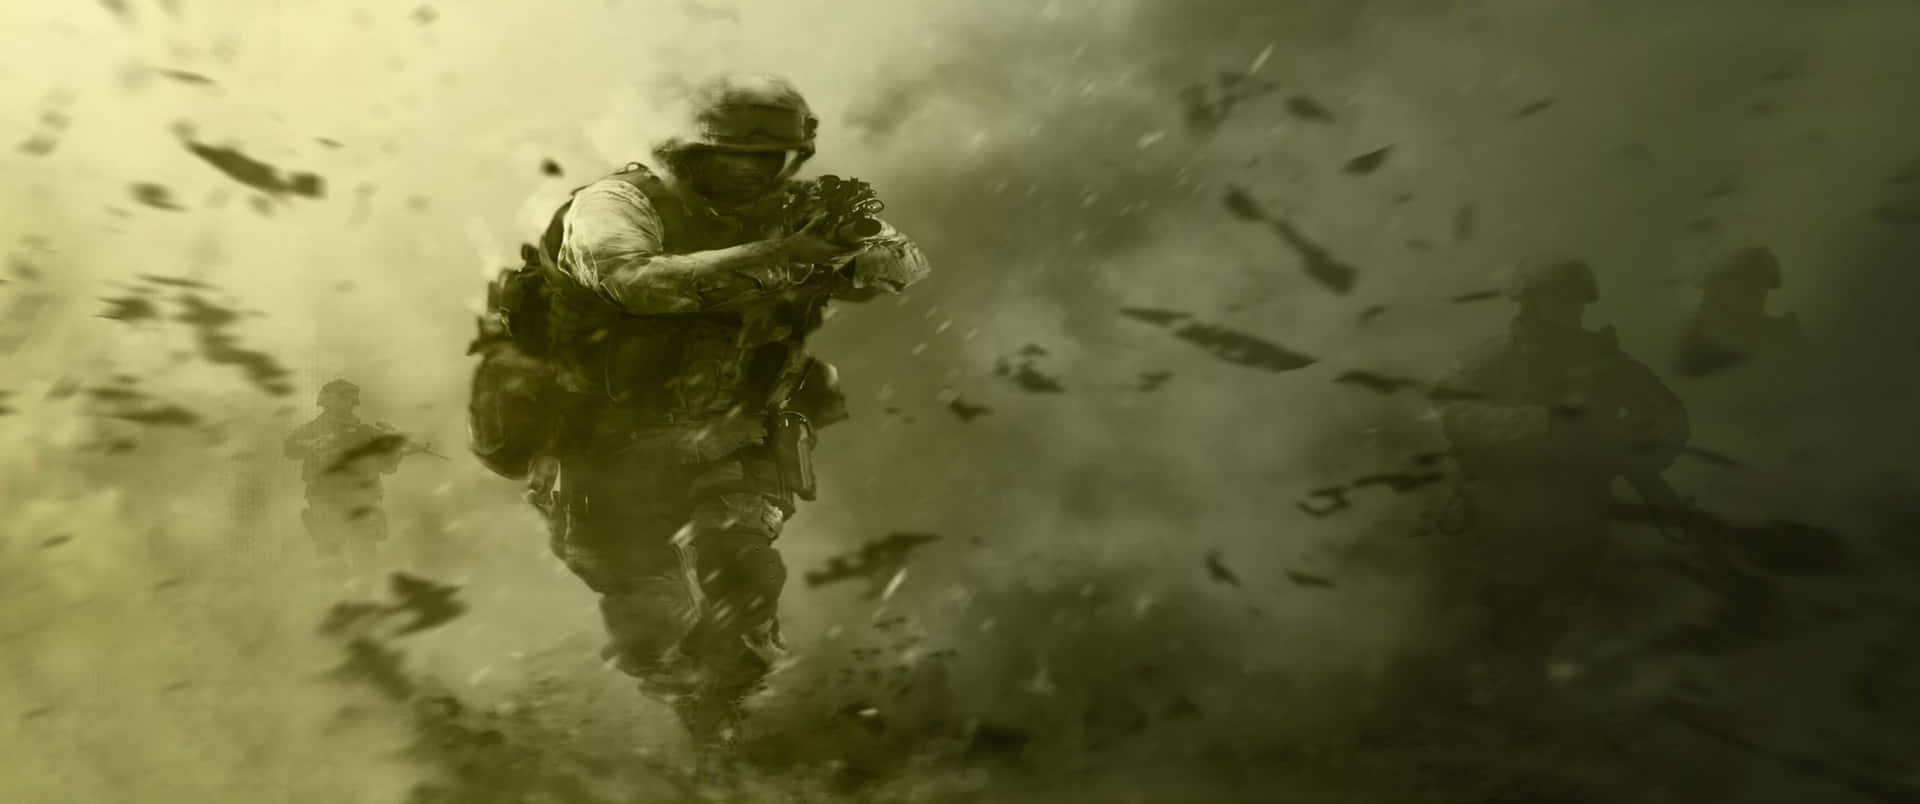 Running From Explosion 3440x1440p Call Of Duty Modern Warfare Background